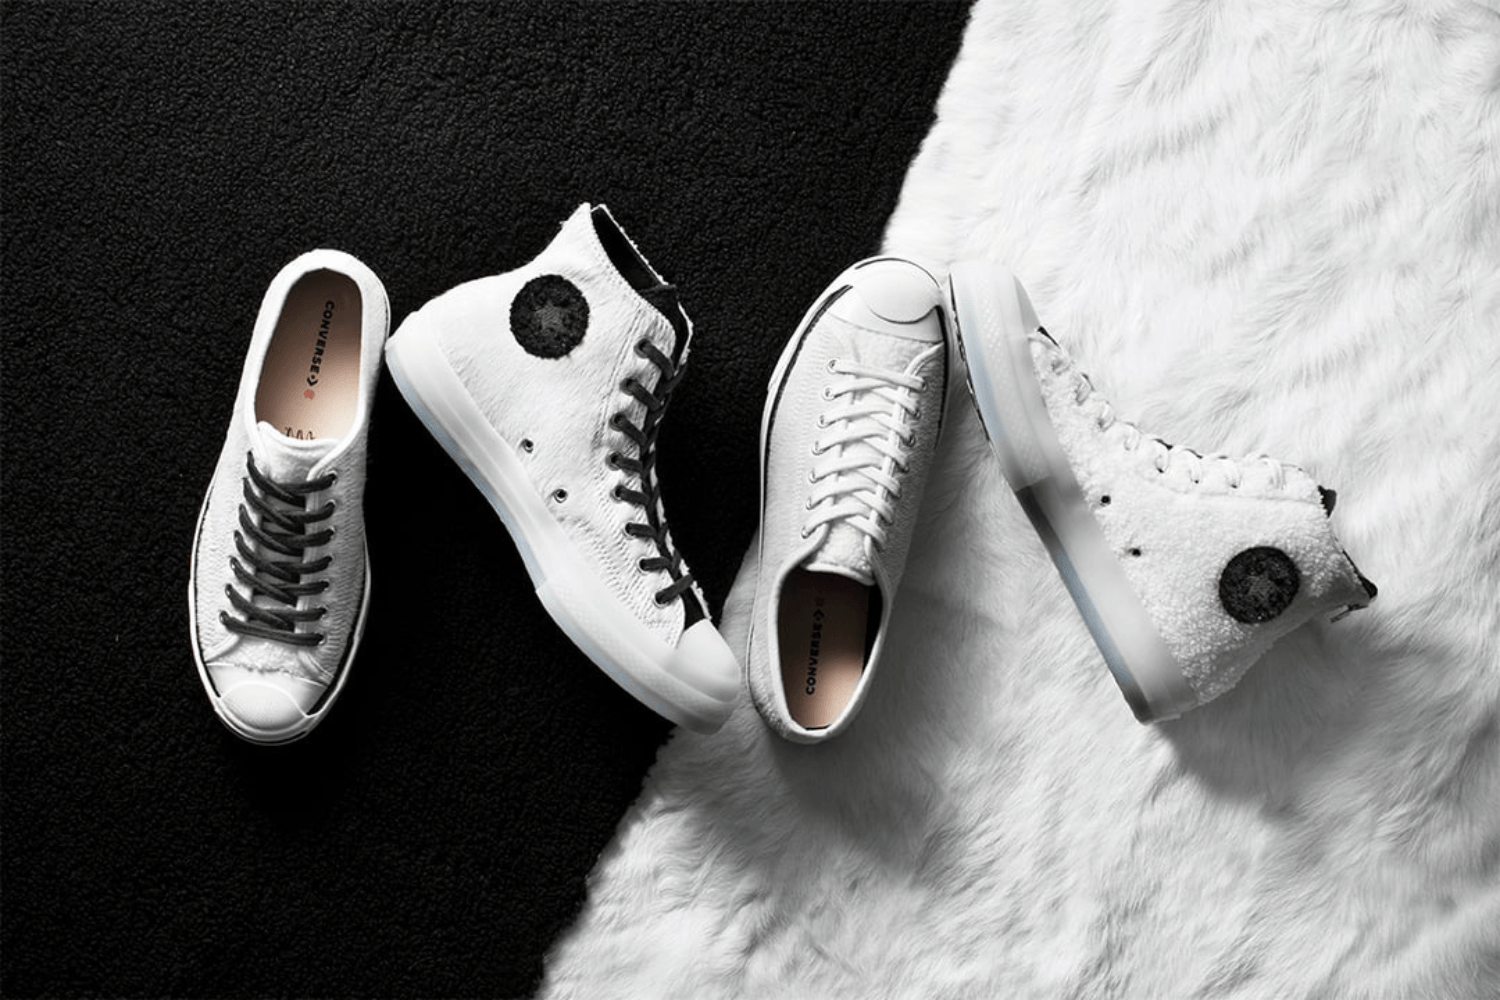 CLOT and Converse come up with a 'Panda' pack